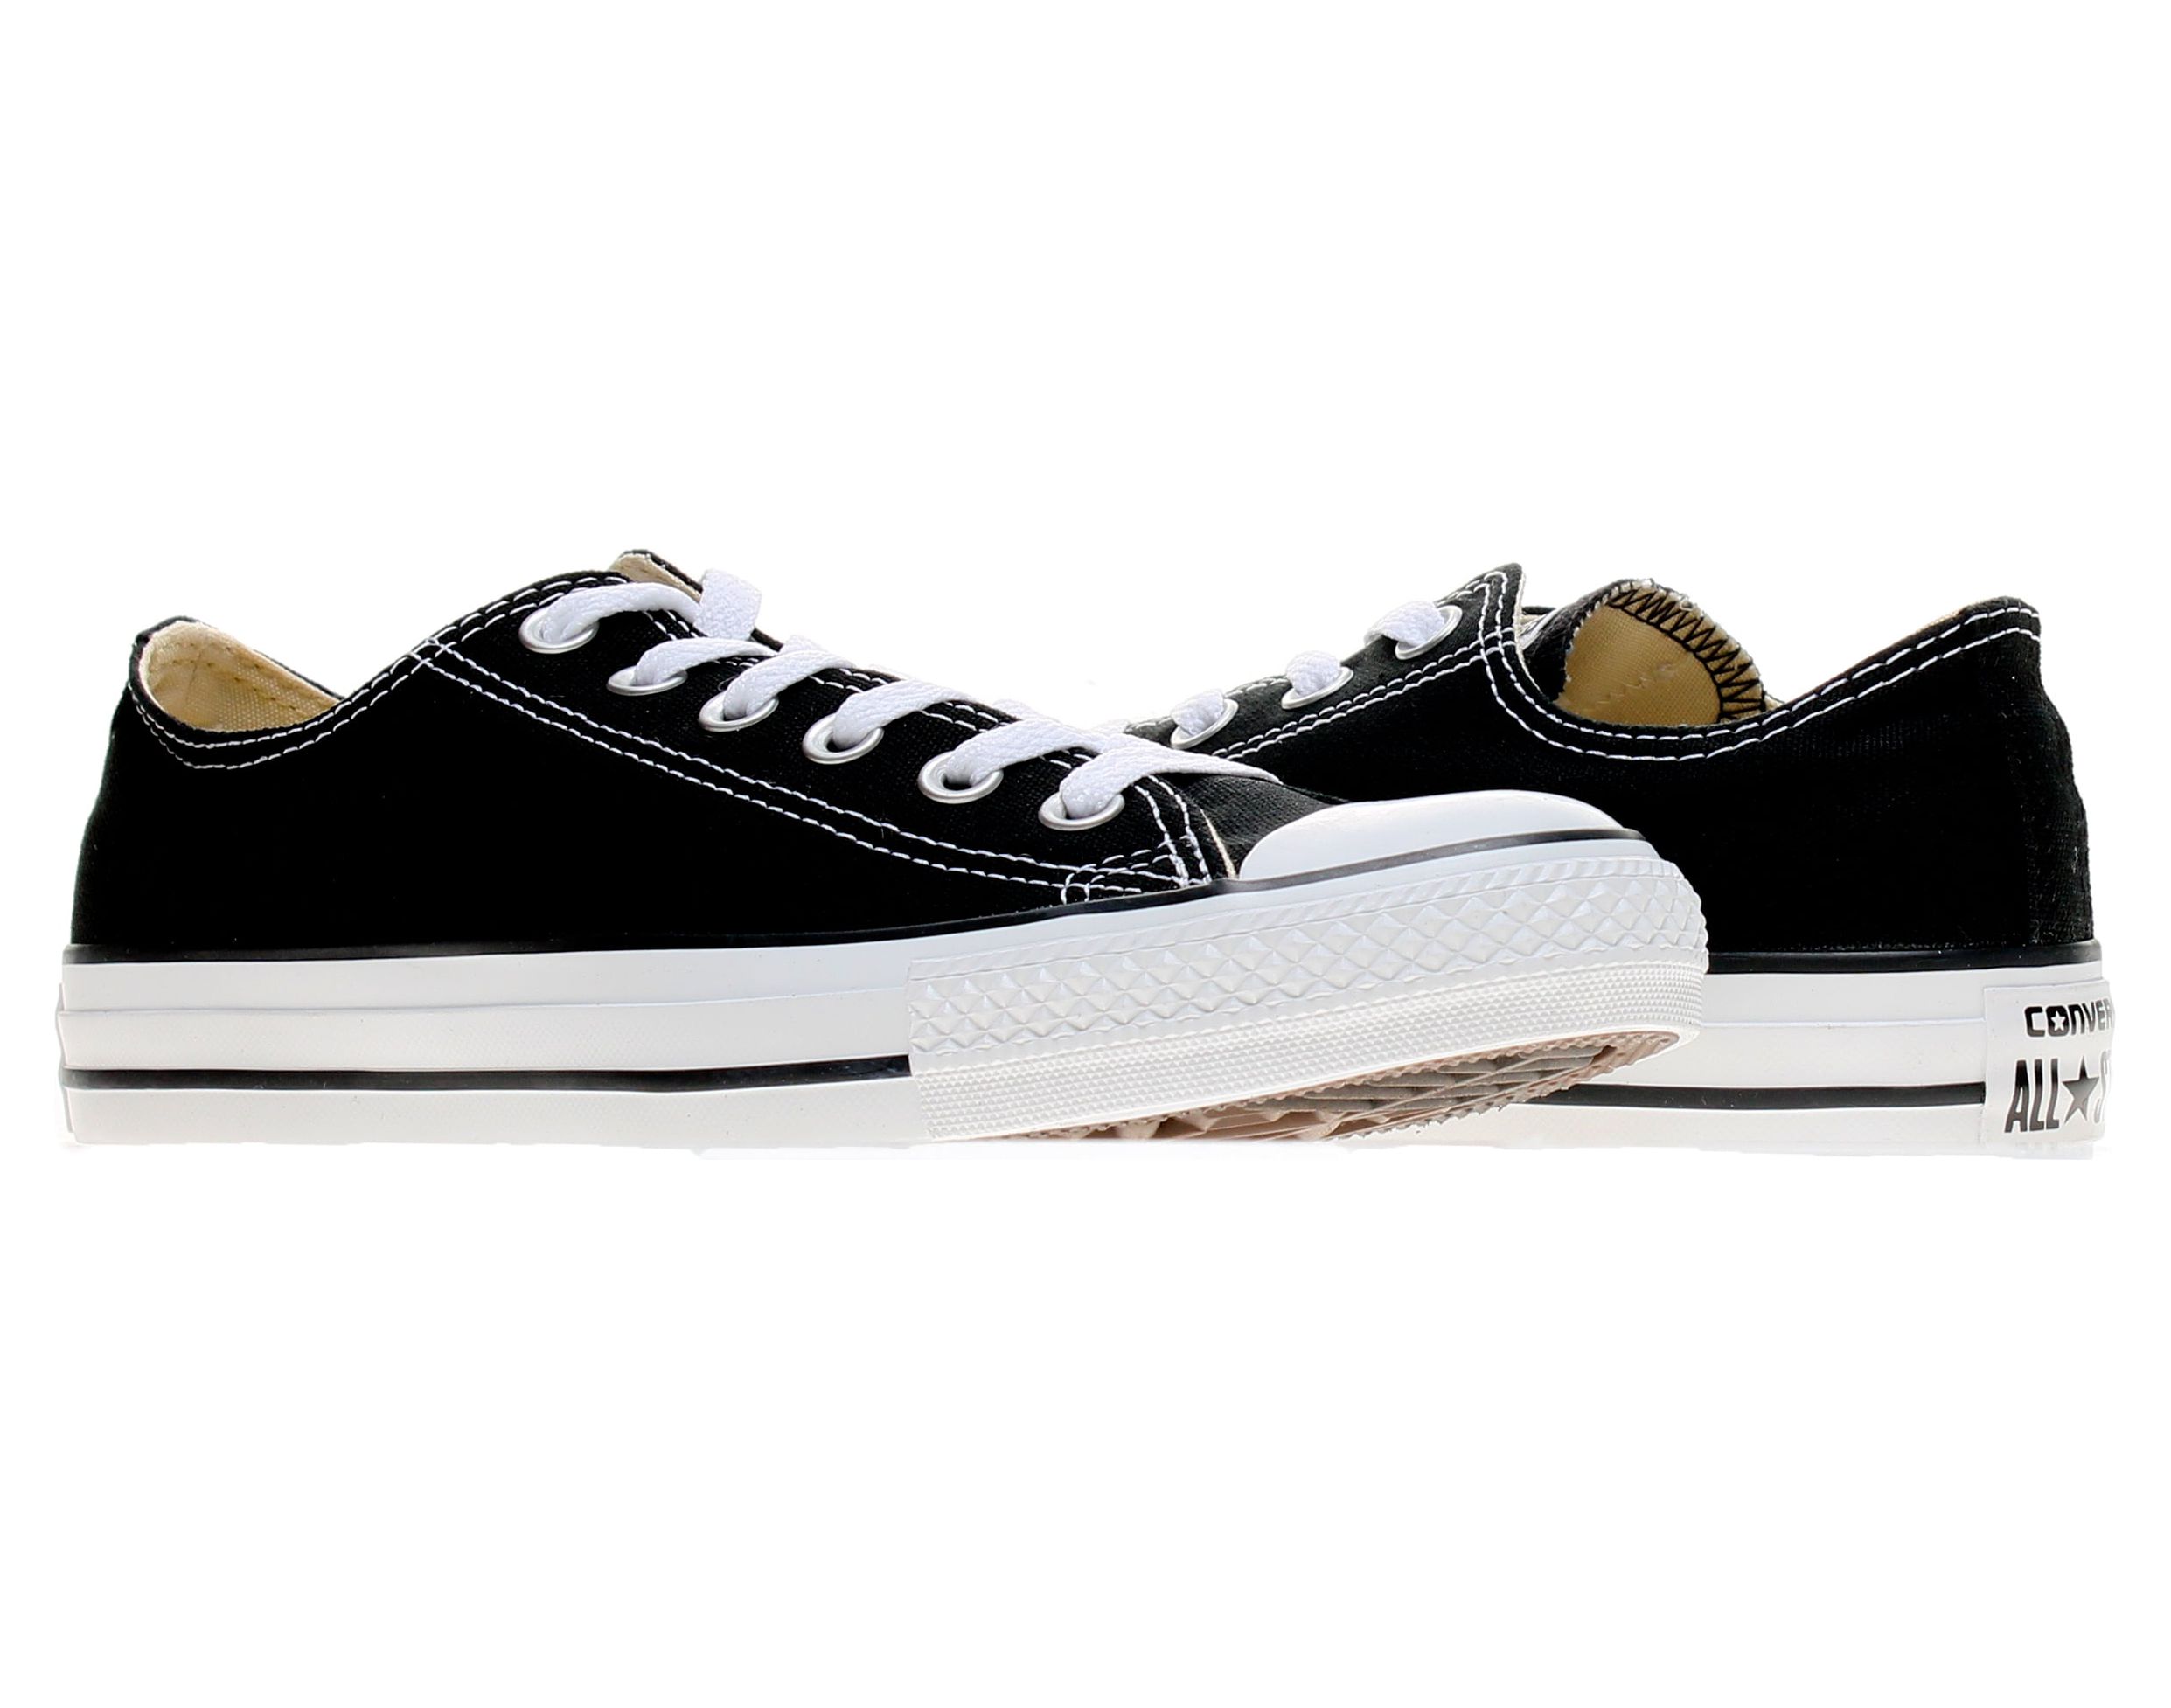 Converse Chuck Taylor All Star Low Top (International Version) Sneaker - image 1 of 6